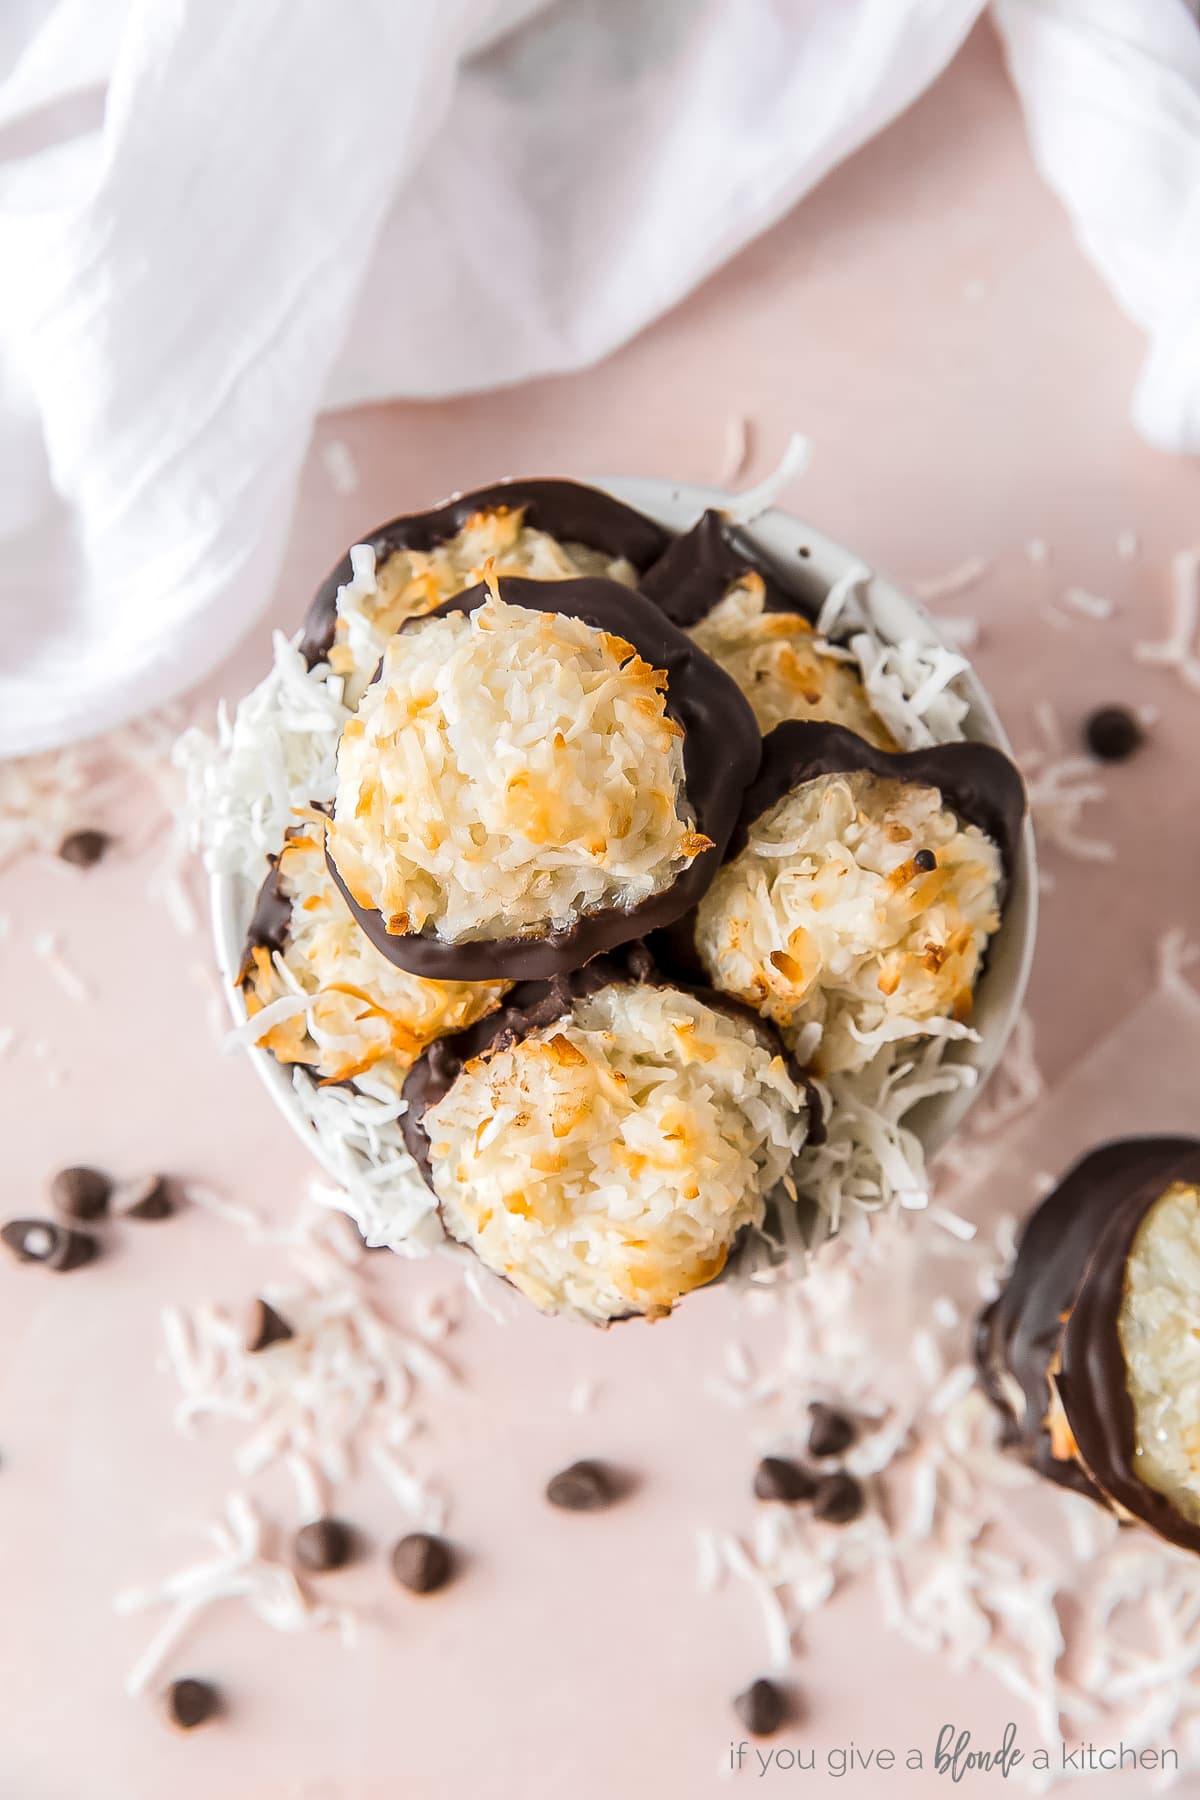 coconut macaroons piled in a small bowl with shredded coconut; bottoms of macaroons dipped in chocolate